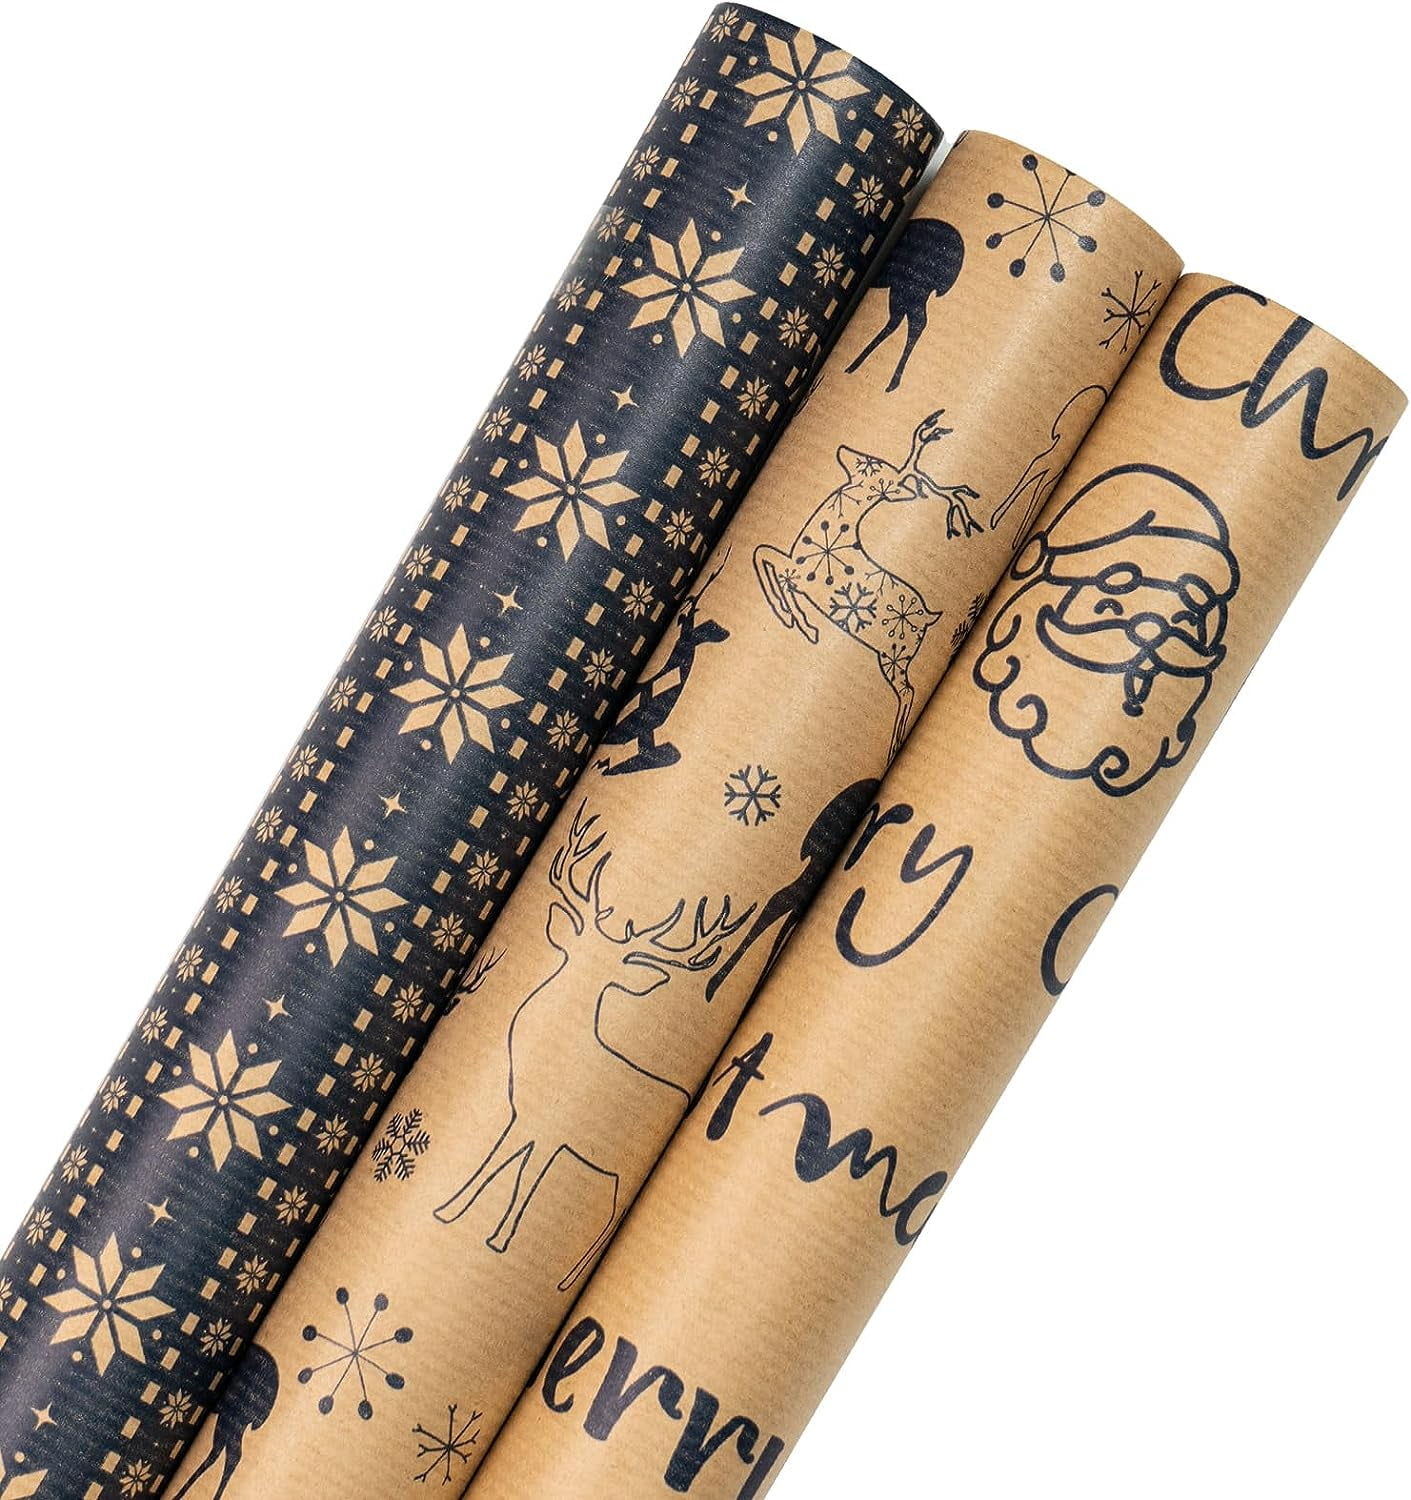  RUSPEPA Kraft Wrapping Paper Rolls - Mini Roll - 17 inches x 10  feet per Roll, Total of 4 Rolls, Colorful Birthday : Health & Household